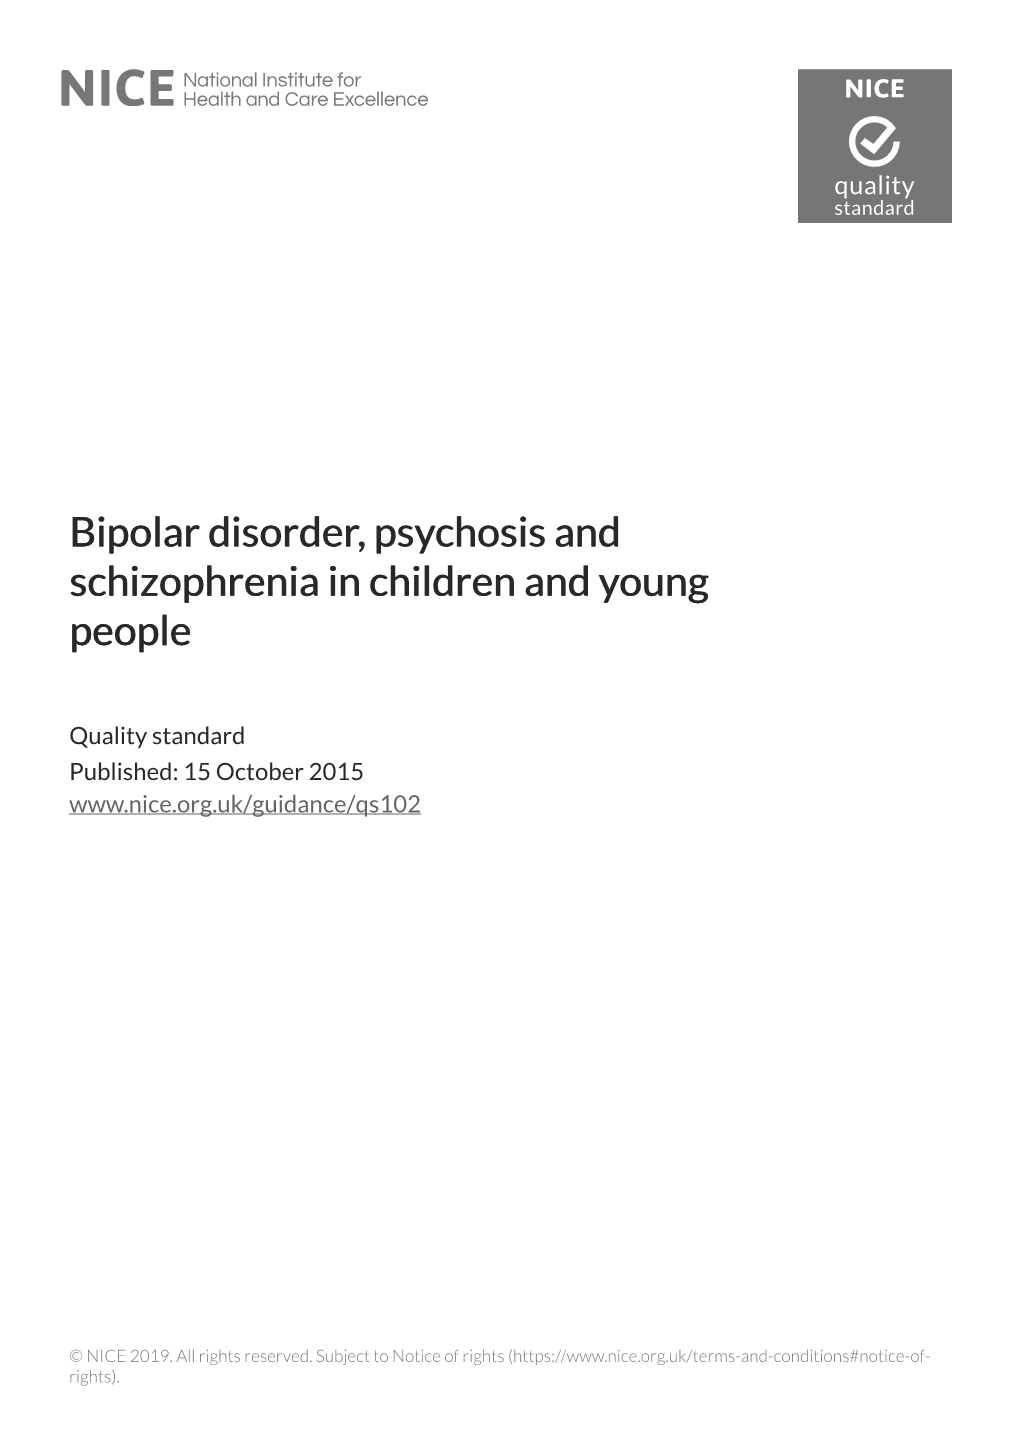 Bipolar Disorder, Psychosis and Schizophrenia in Children and Young People